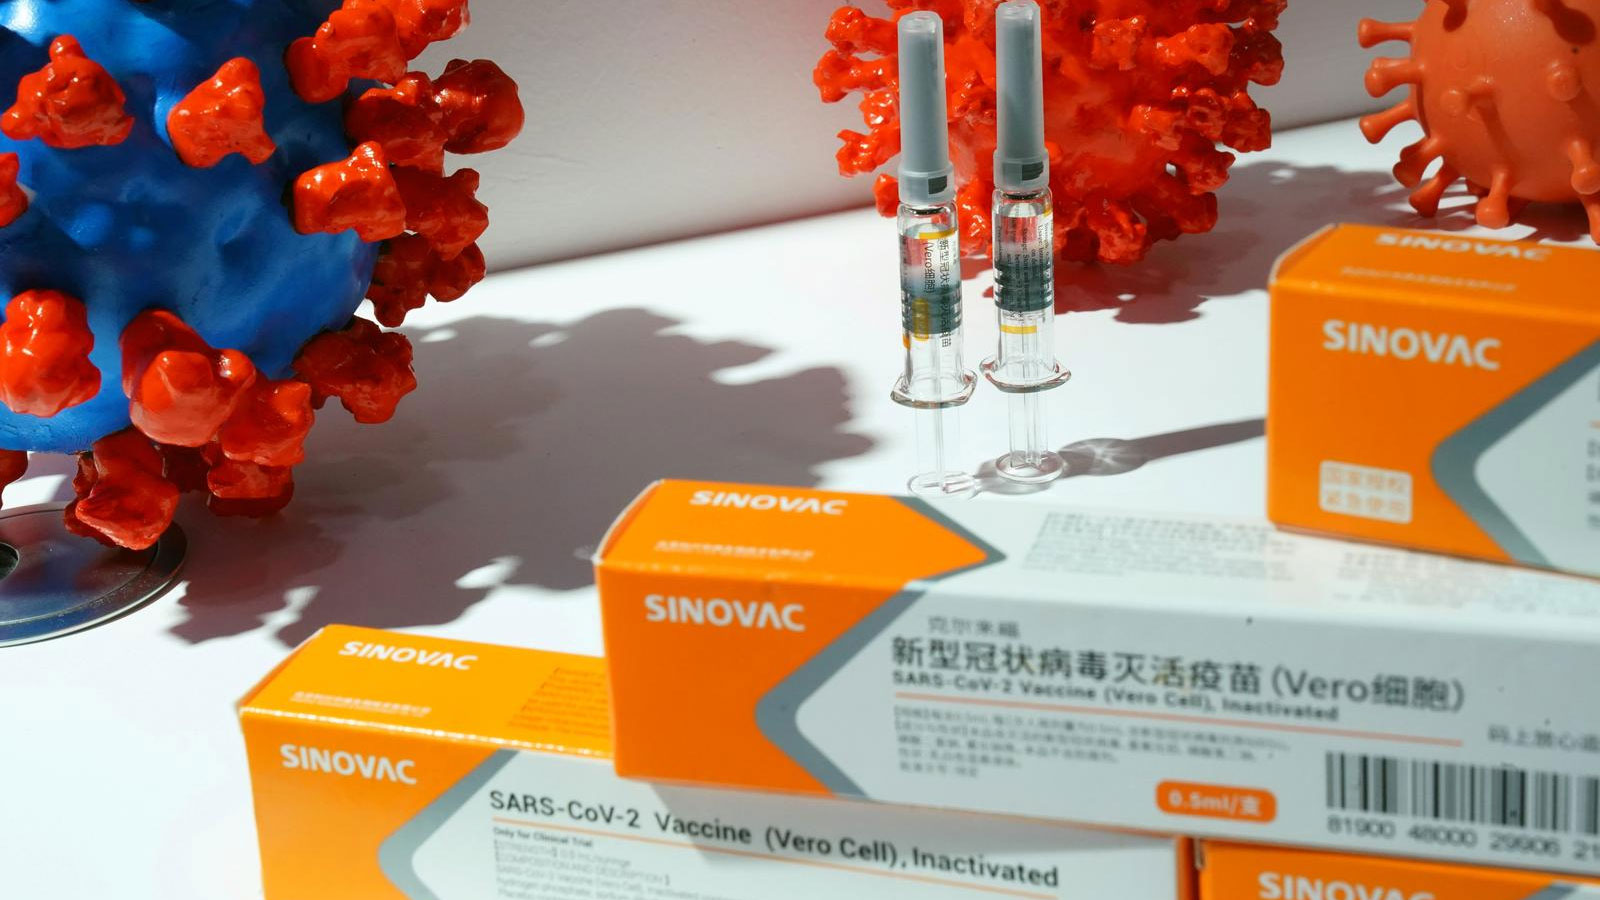 China’s Sinovac COVID-19 Vaccine Less Effective than Initially Thought